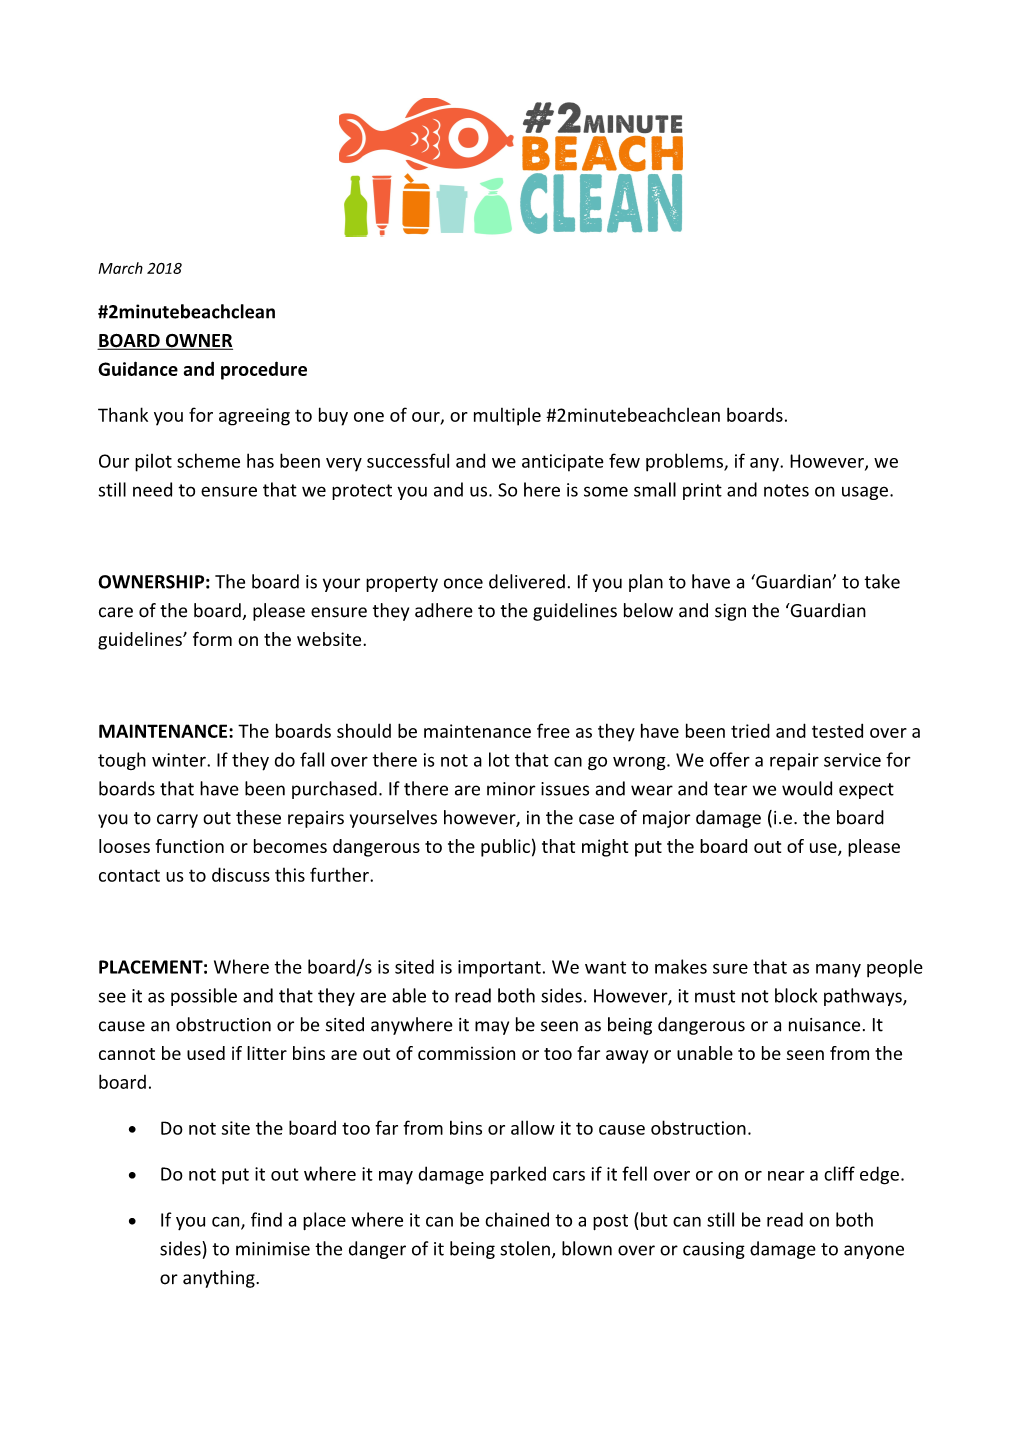 2Minutebeachclean BOARD OWNER Guidance and Procedure